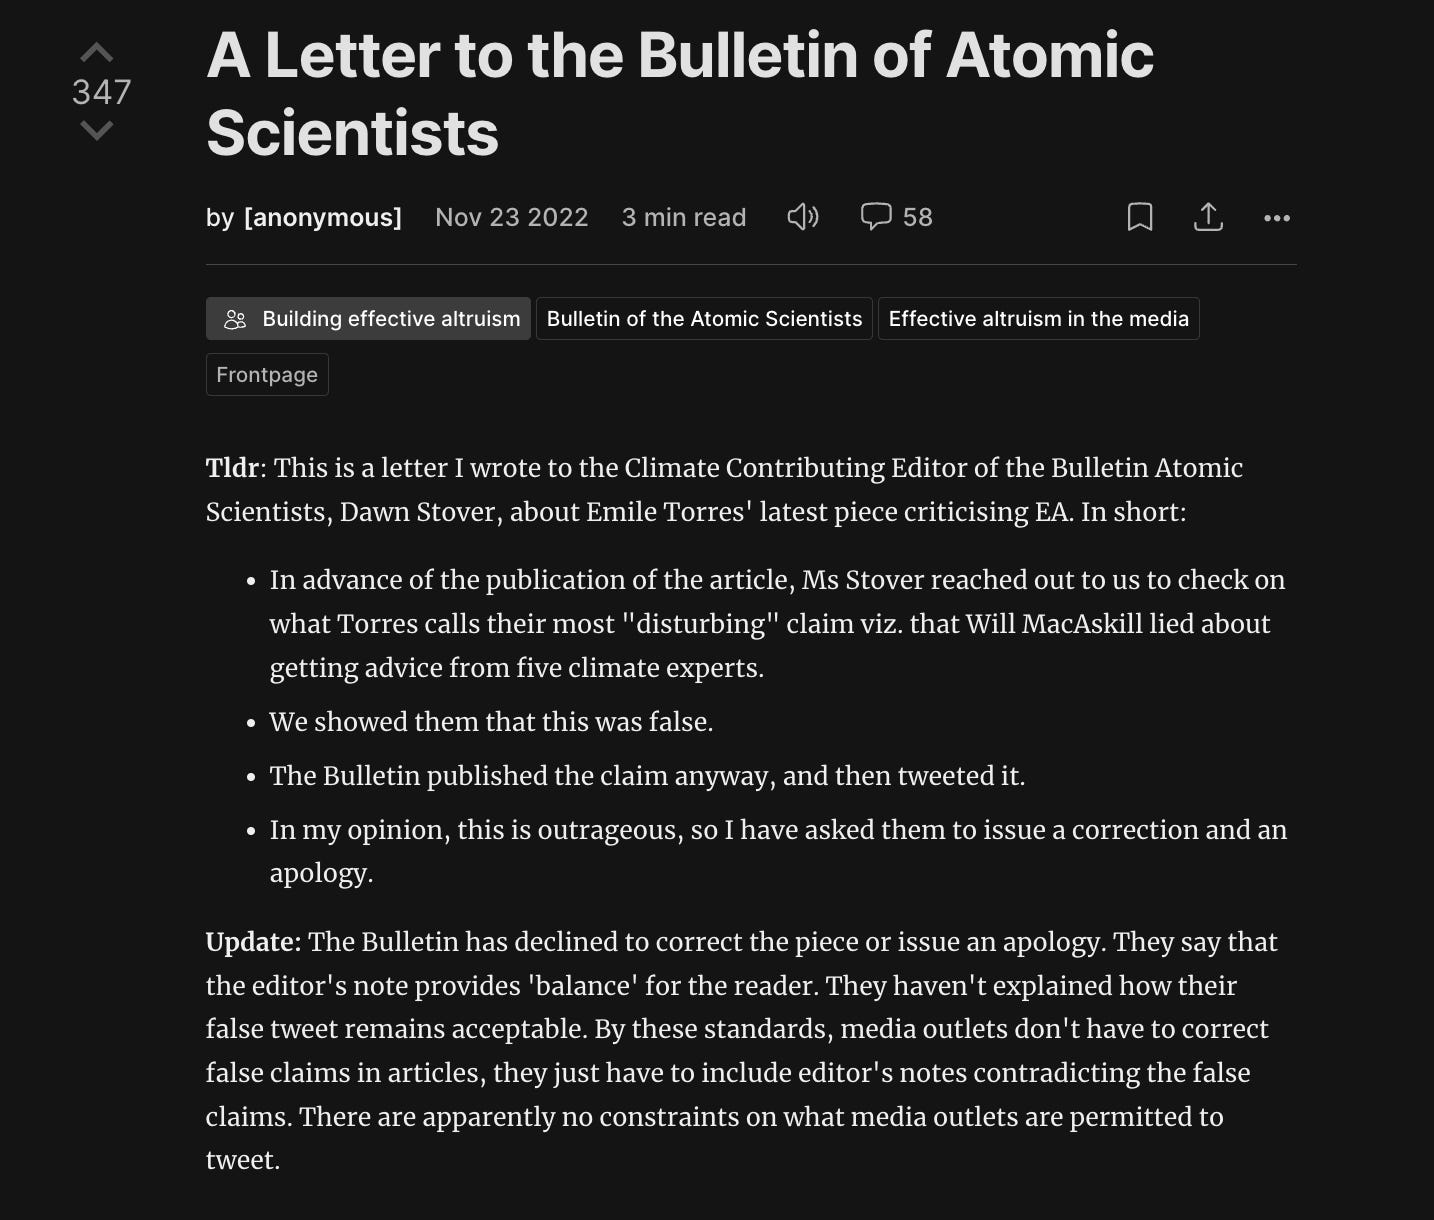 Tldr: This is a letter I wrote to the Climate Contributing Editor of the Bulletin Atomic Scientists, Dawn Stover, about Emile Torres' latest piece criticising EA. In short:   In advance of the publication of the article, Ms Stover reached out to us to check on what Torres calls their most "disturbing" claim viz. that Will MacAskill lied about getting advice from five climate experts.  We showed them that this was false. The Bulletin published the claim anyway, and then tweeted it.  In my opinion, this is outrageous, so I have asked them to issue a correction and an apology.  Update: The Bulletin has declined to correct the piece or issue an apology. They say that the editor's note provides 'balance' for the reader. They haven't explained how their false tweet remains acceptable. By these standards, media outlets don't have to correct false claims in articles, they just have to include editor's notes contradicting the false claims. There are apparently no constraints on what media outlets are permitted to tweet. 